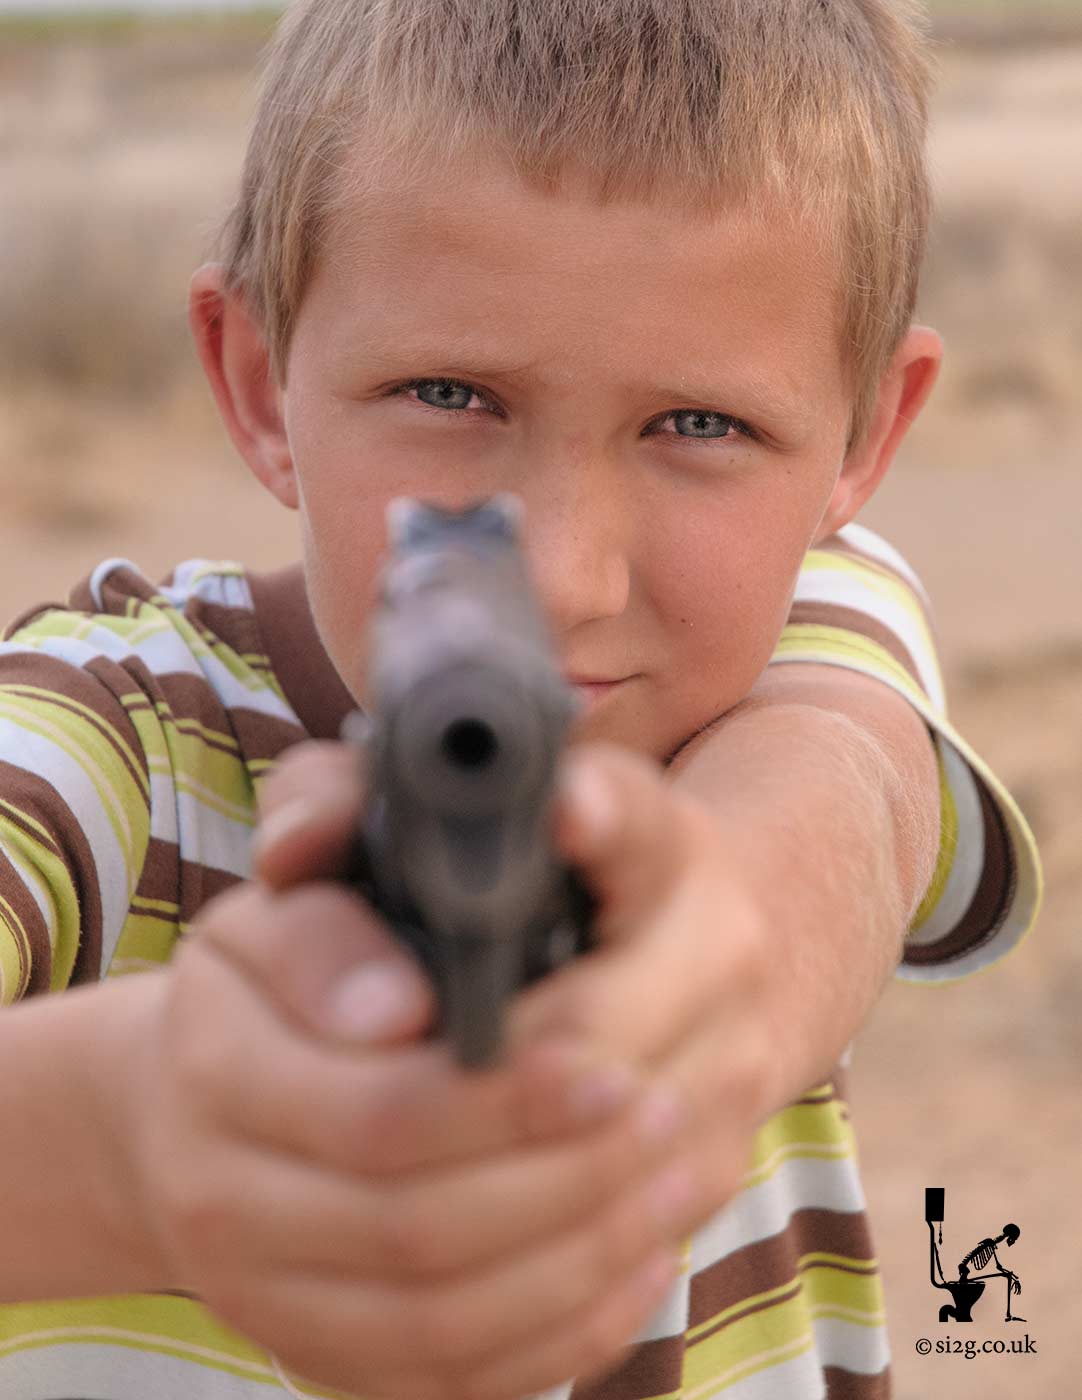 Child with Gun - This South African child has been taught to protect his village using live ammunition.